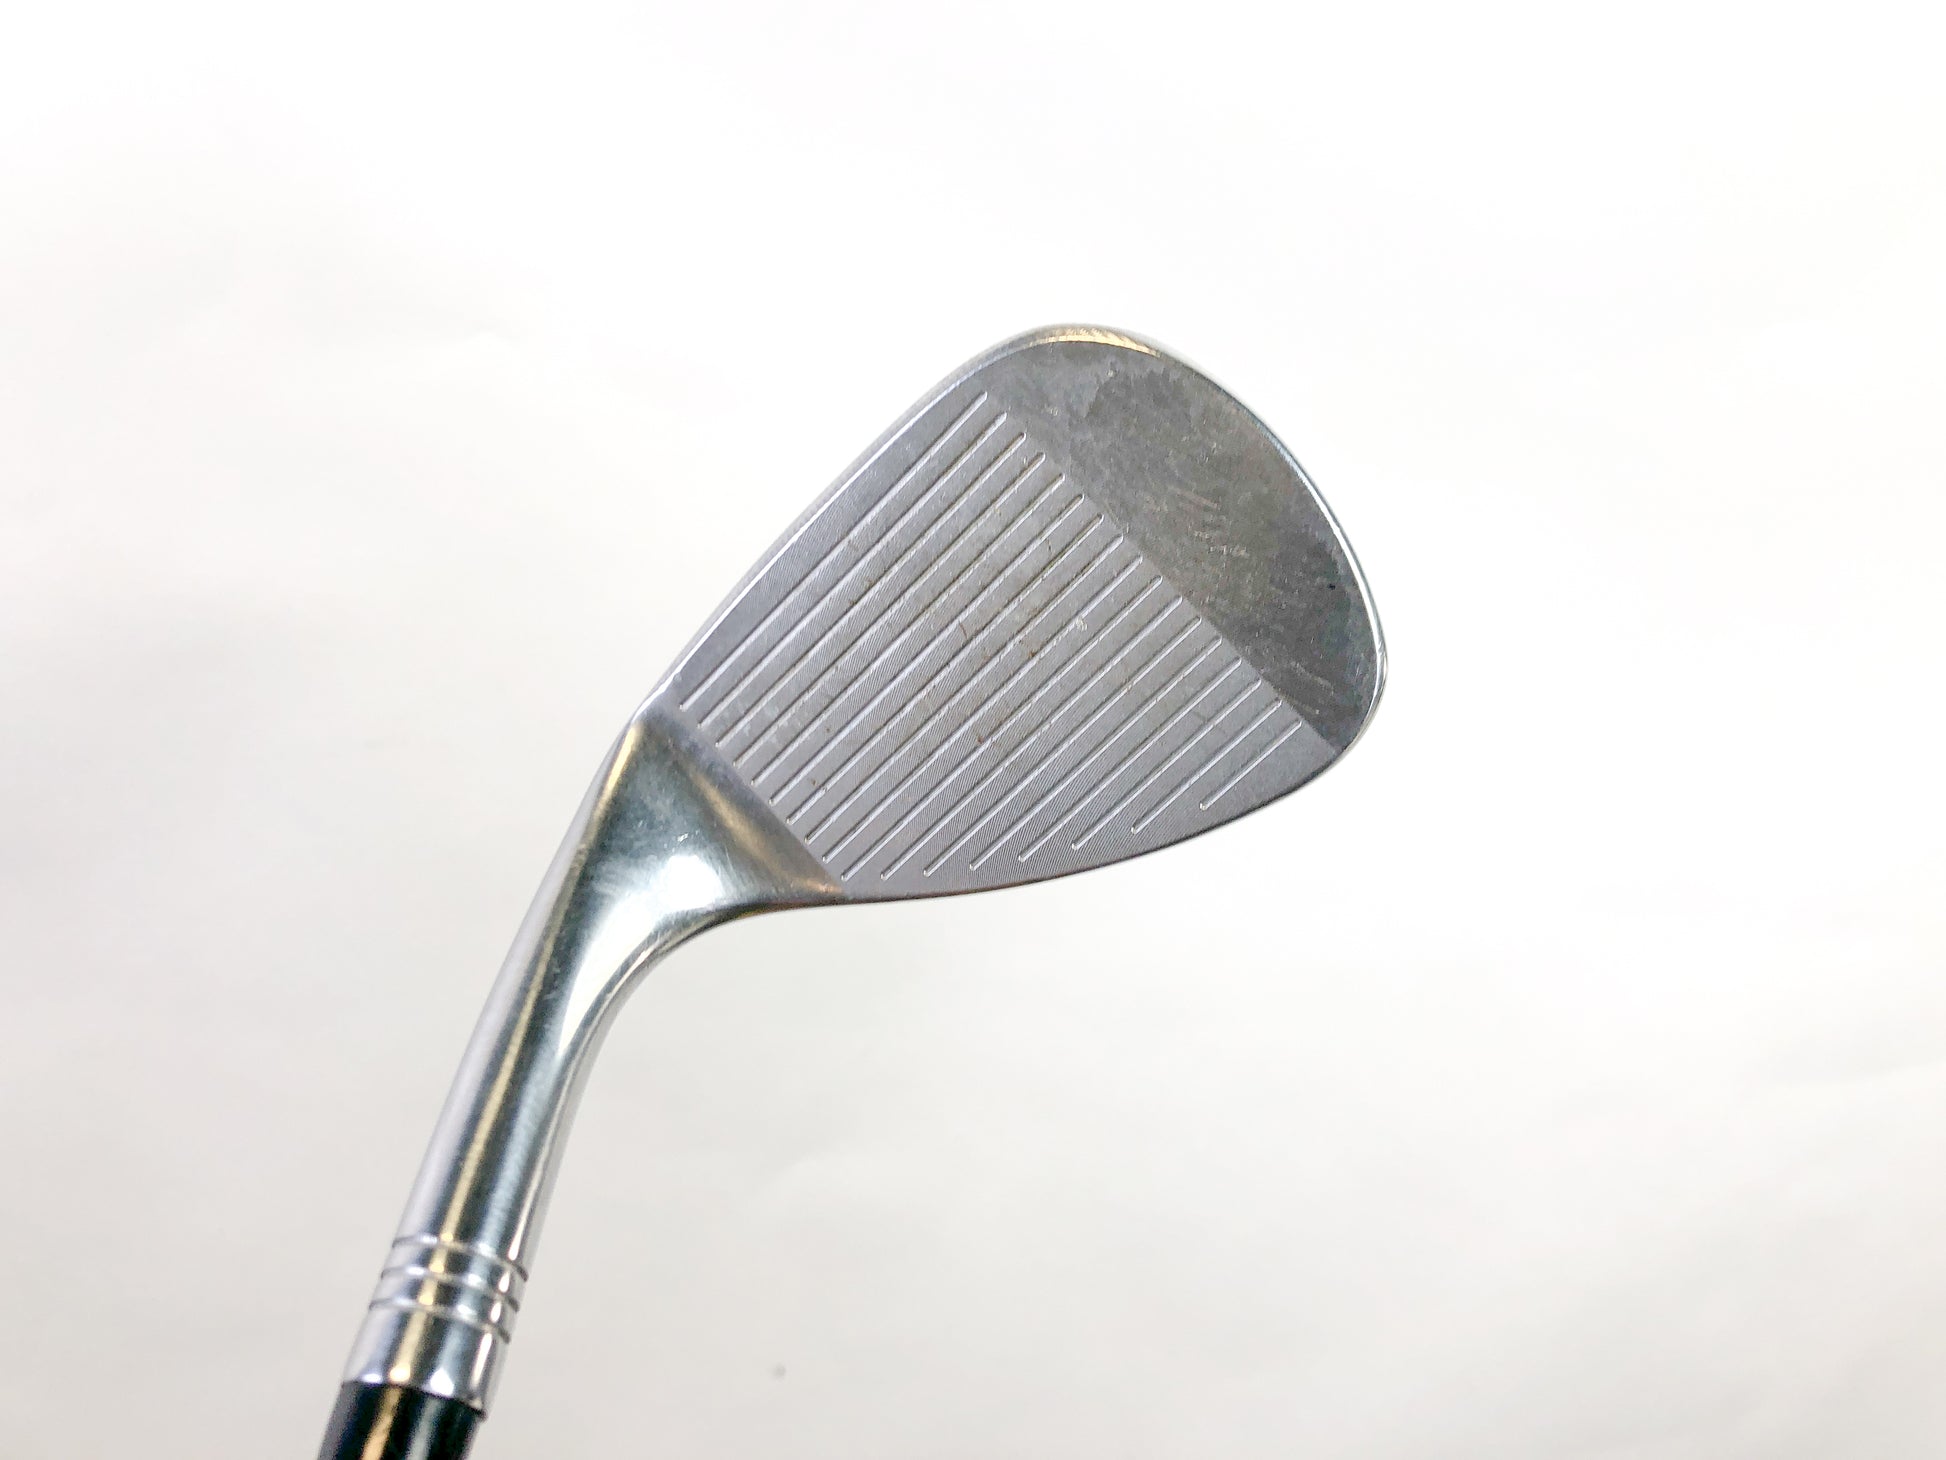 Used TaylorMade Milled Grind Satin Chrome Sand Wedge - Right-Handed - 56 Degrees - Stiff Flex-Next Round